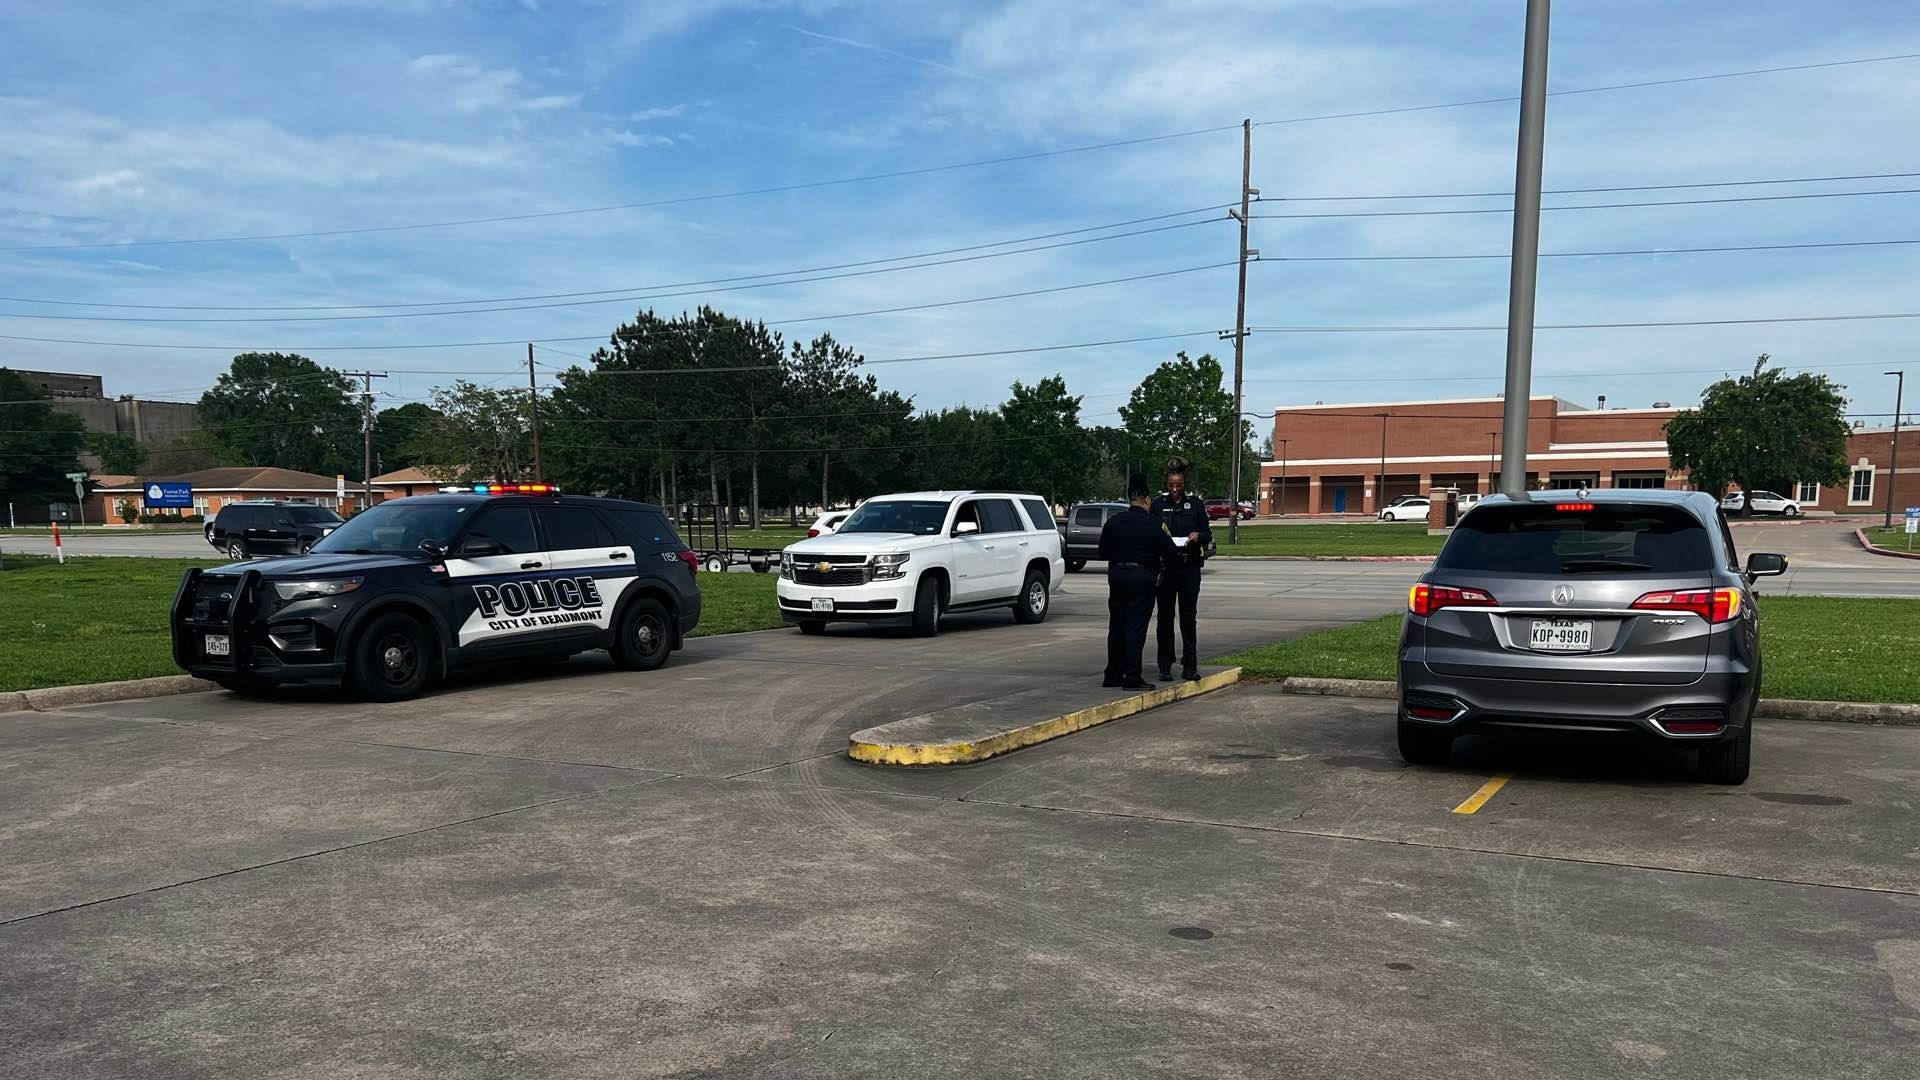 "It was one of our students who was attempting to cross Major," Beaumont ISD Police Chief Malbrough said.